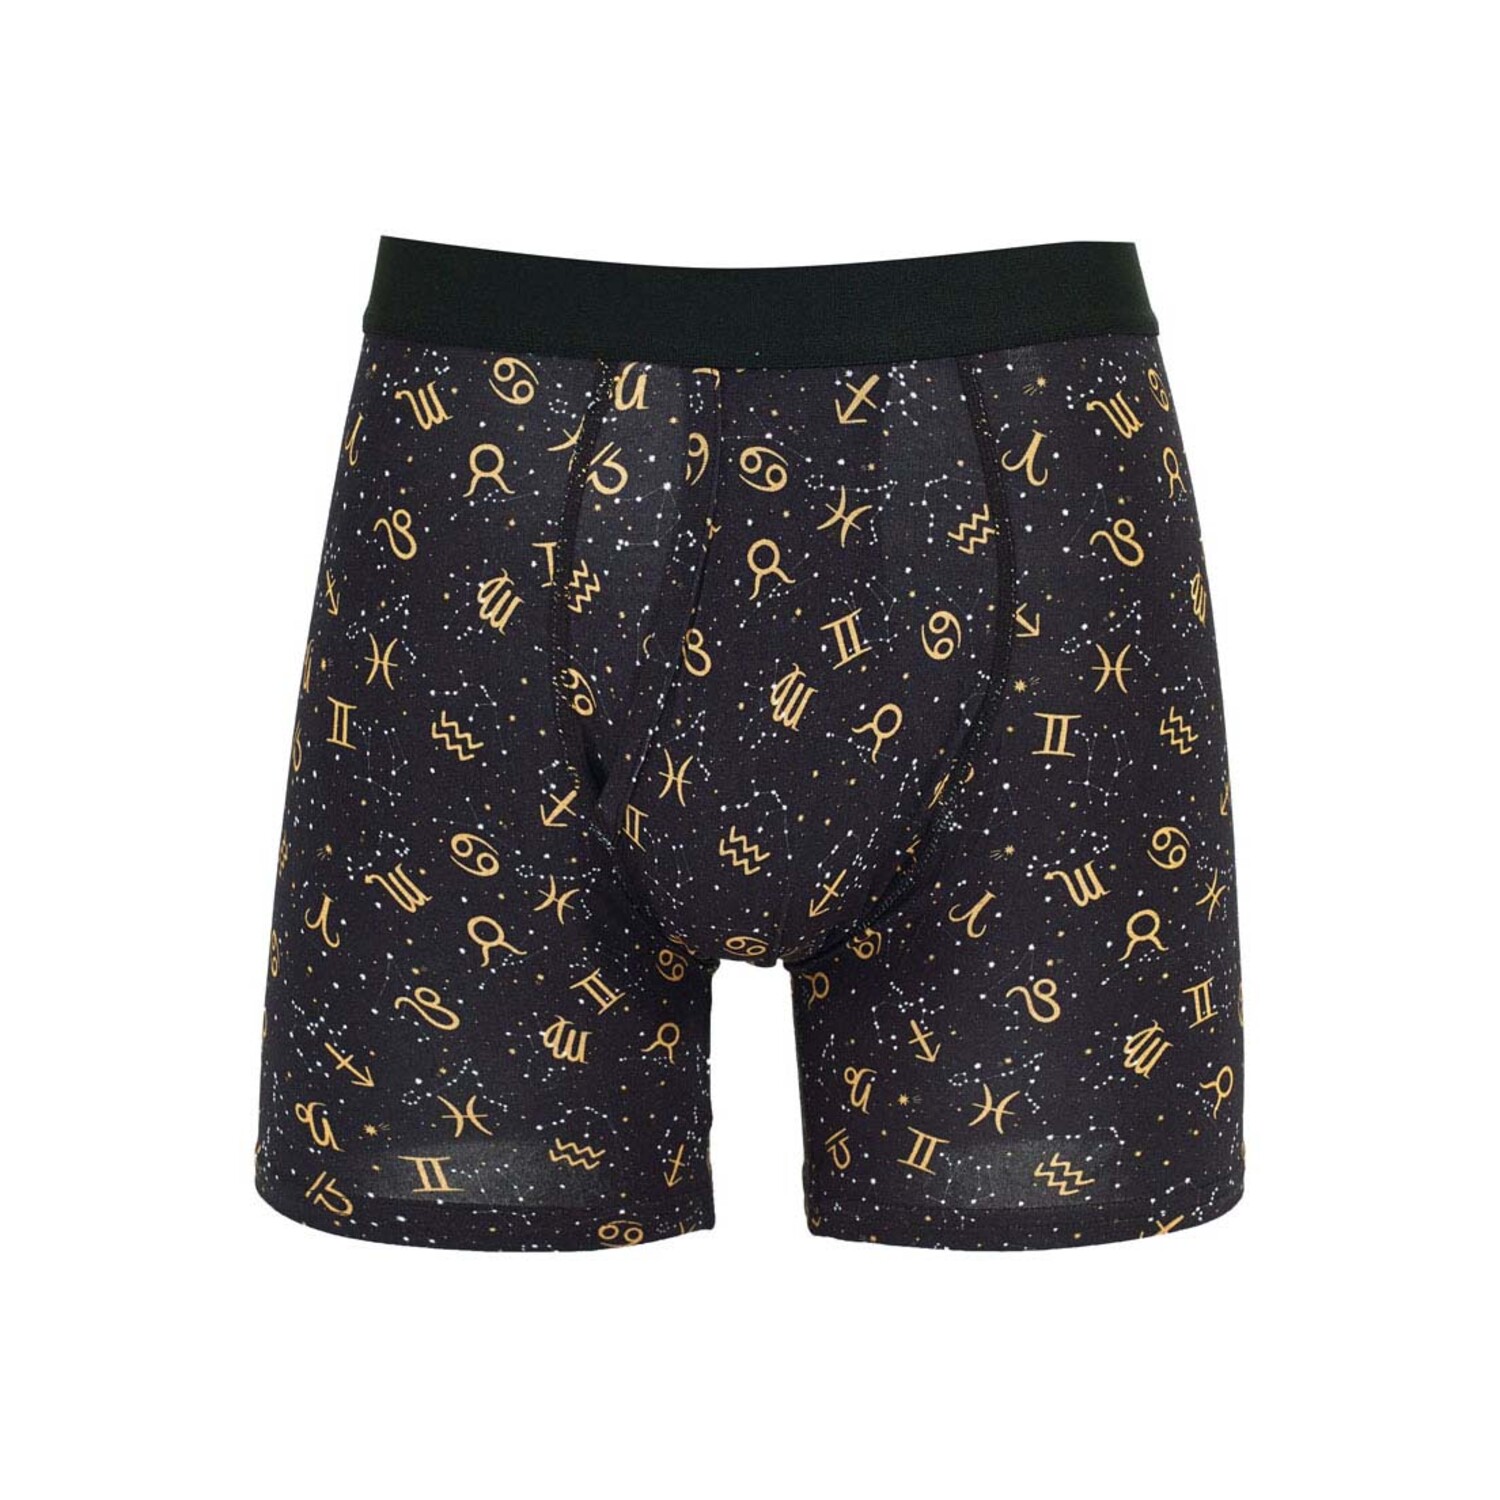 Sign Softer Than Cotton Boxer Brief // Black (S) - Warriors & Scholars -  Touch of Modern